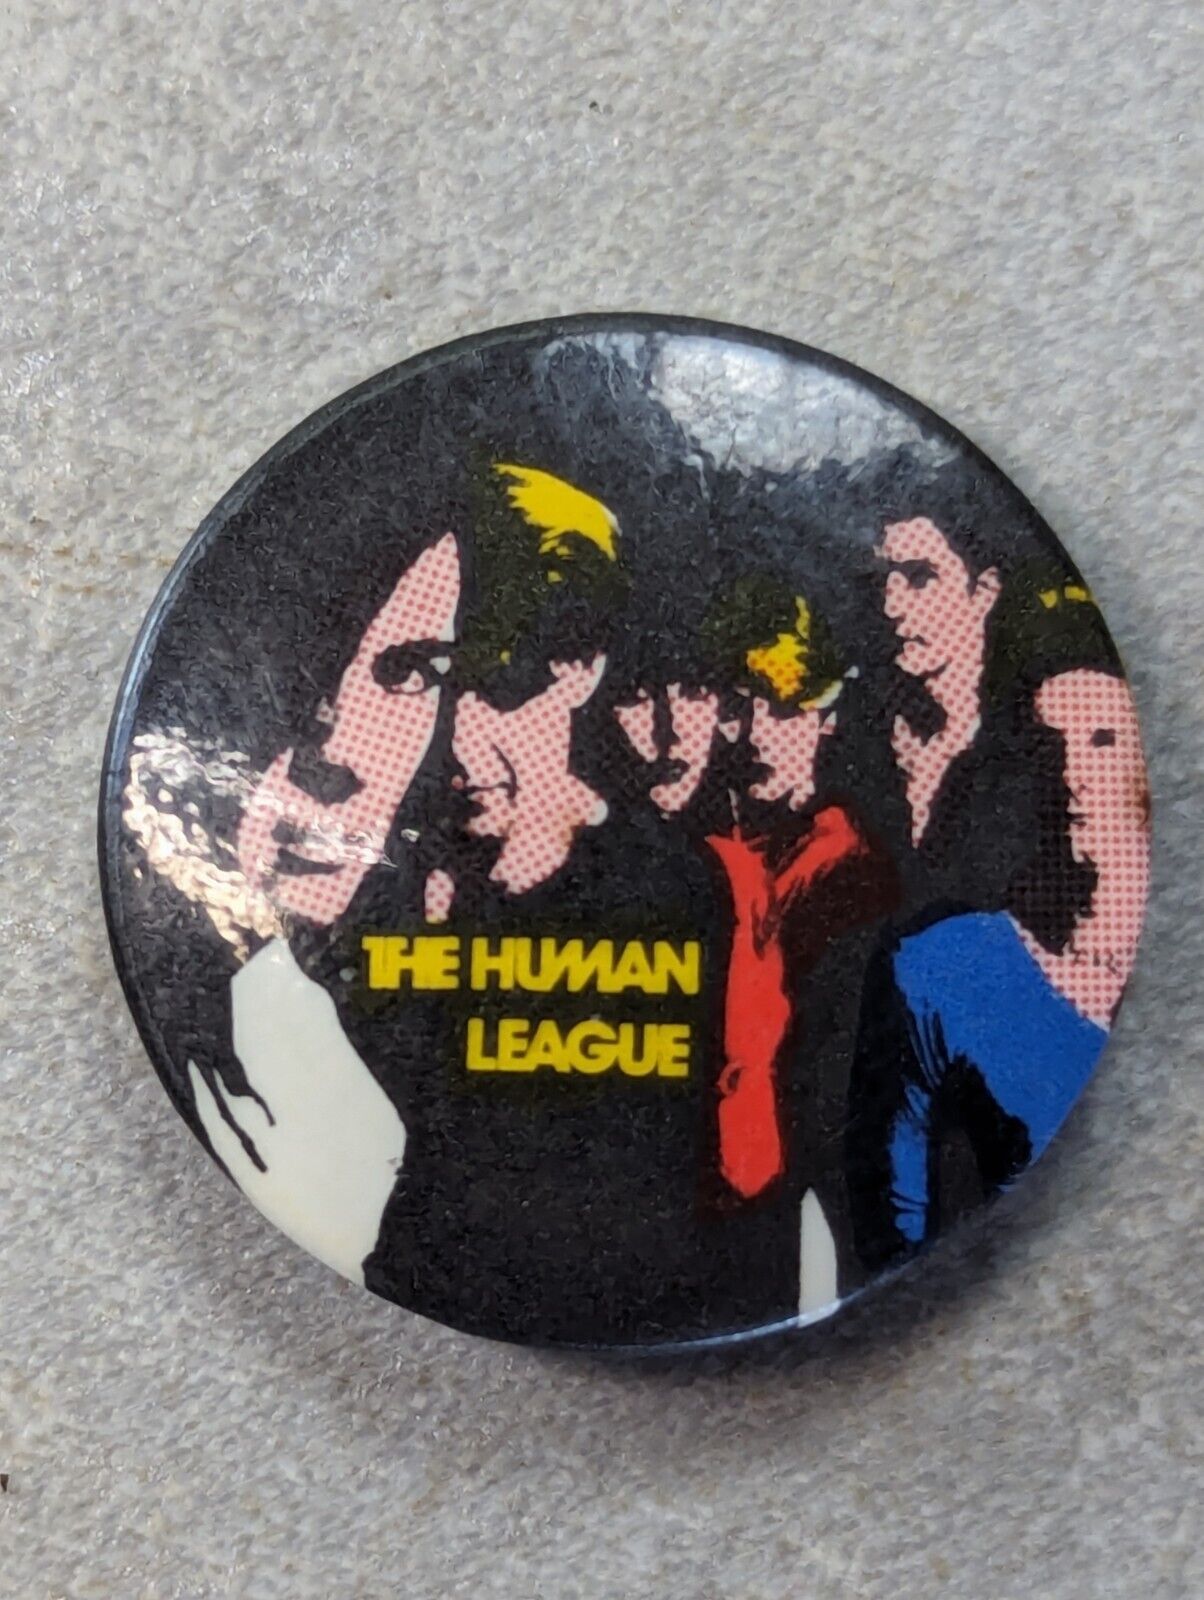 Vintage 80s The Human League PIN BADGE Purchased Around 1986 